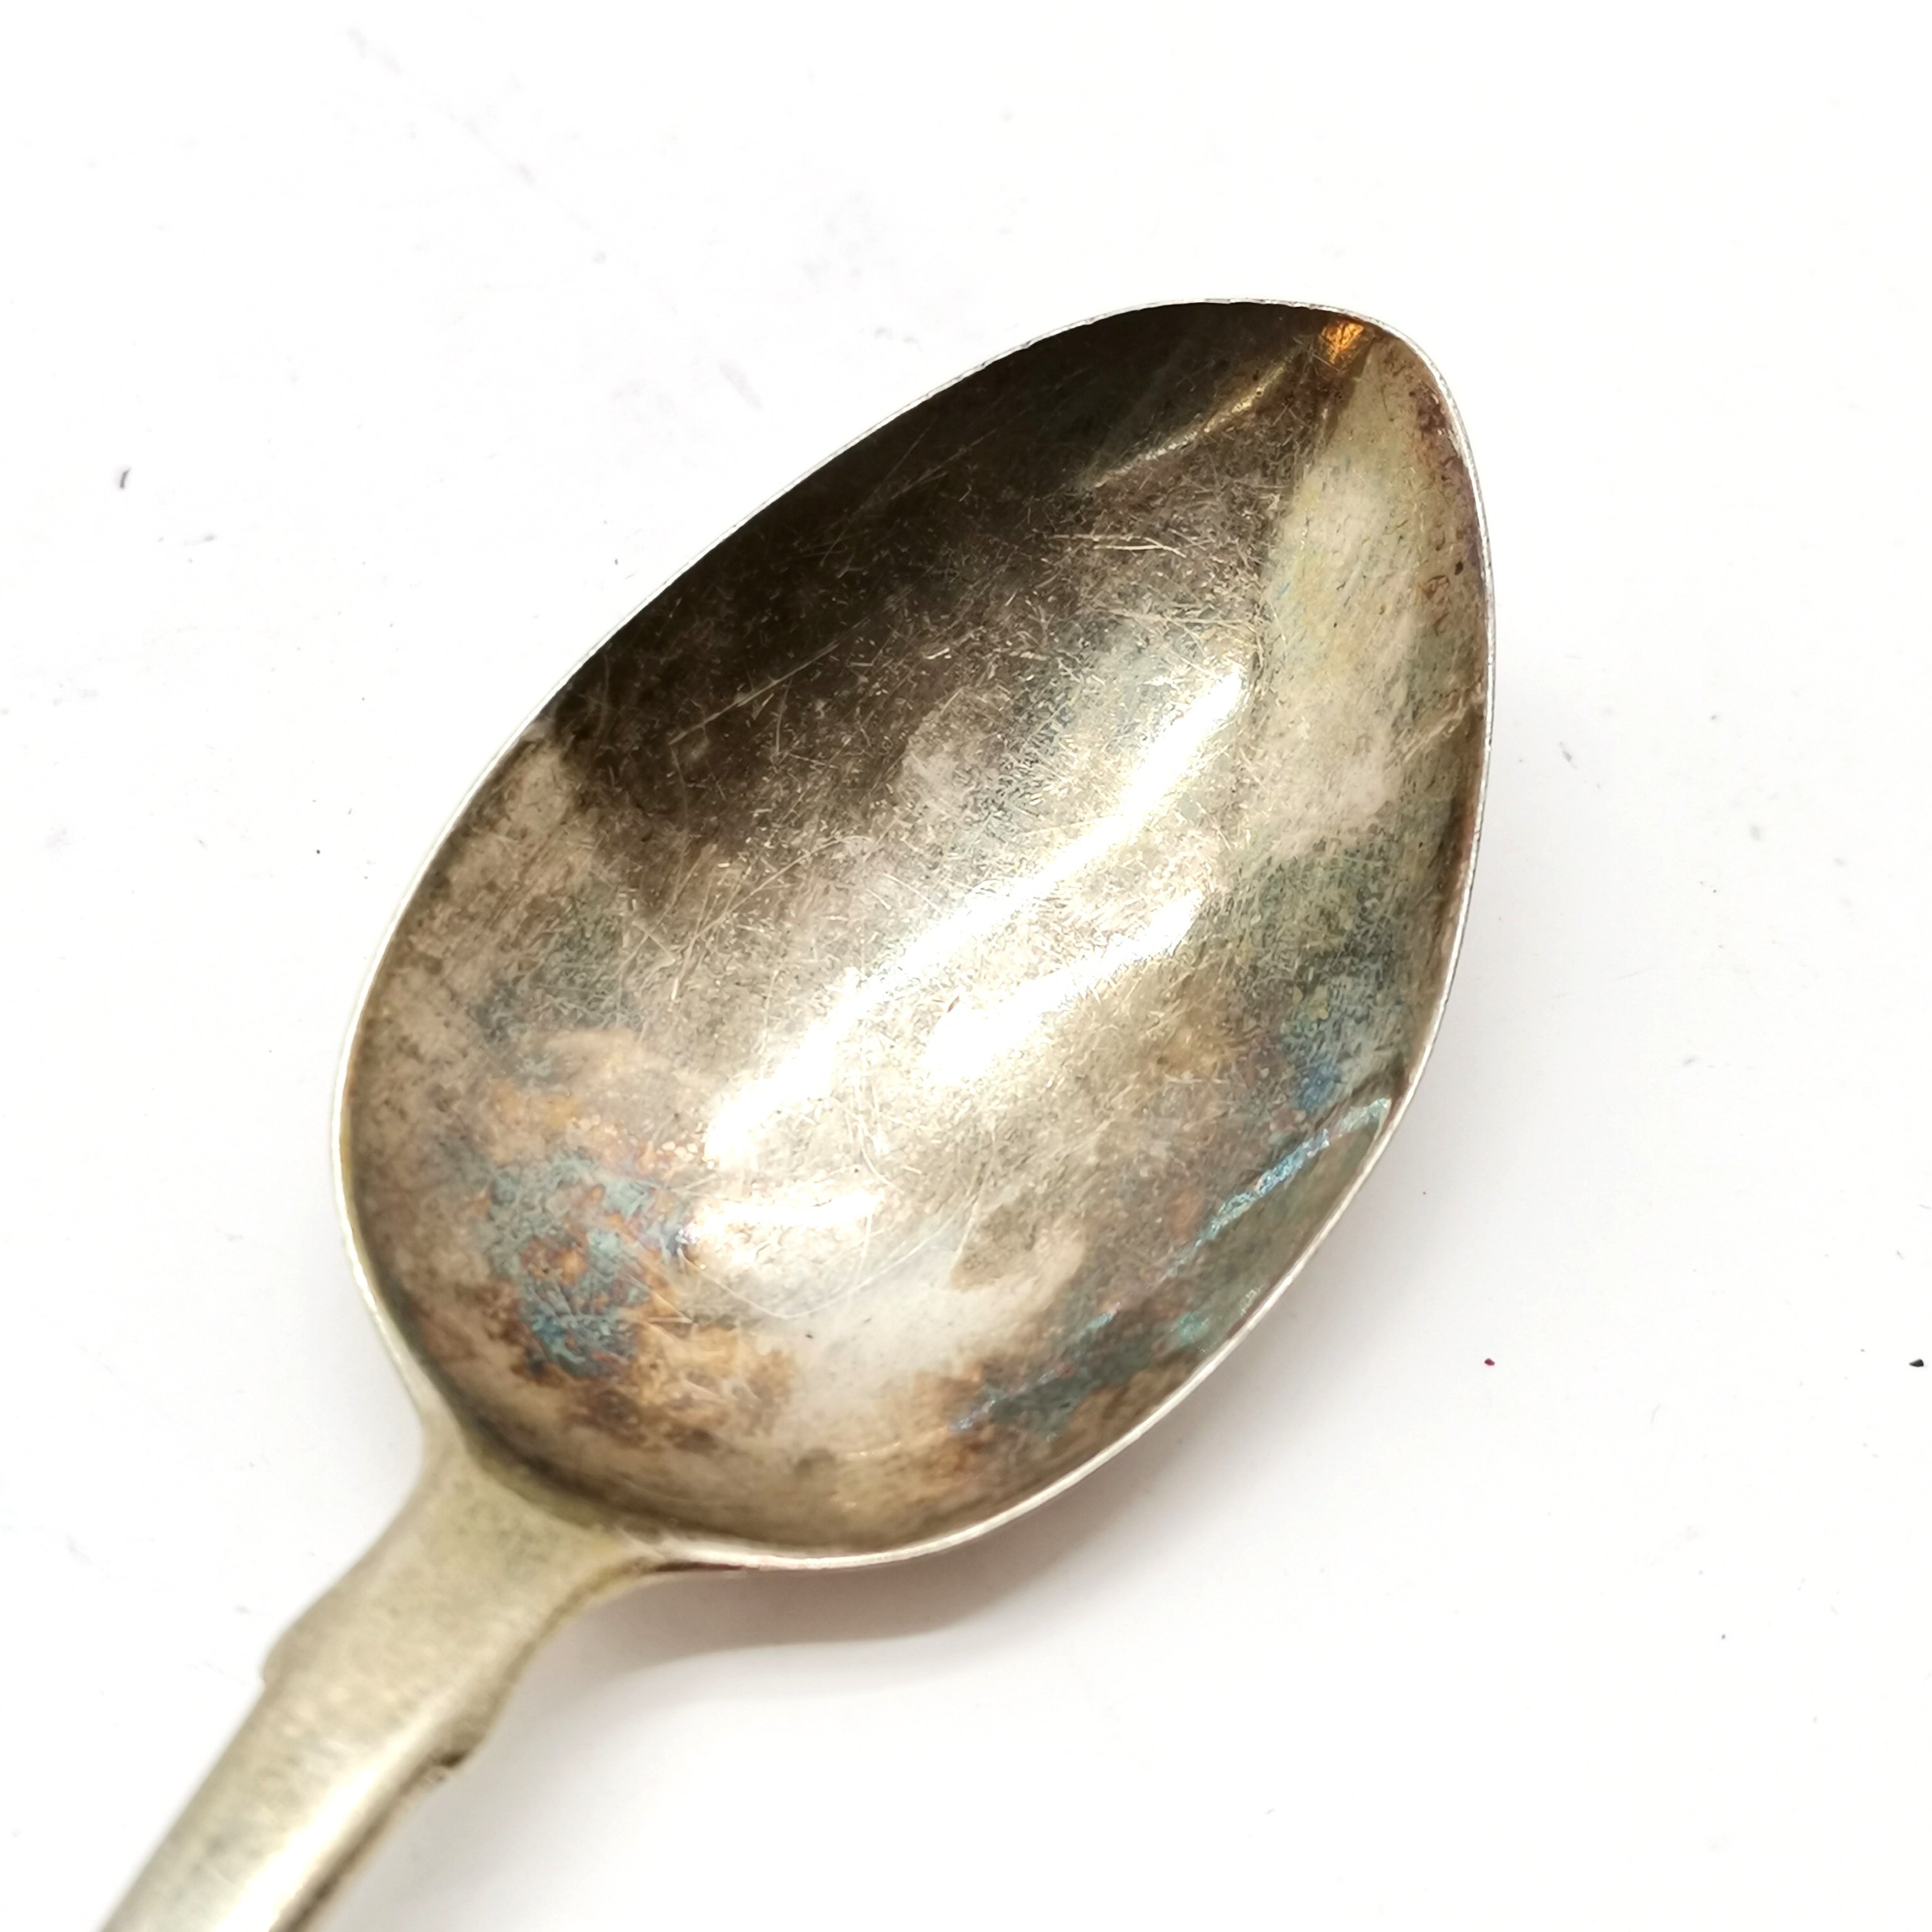 Pair of 1822 fiddle ladles by William Eley & William Fearn t/w 1824 rat tailed spoon by Charles - Image 3 of 6